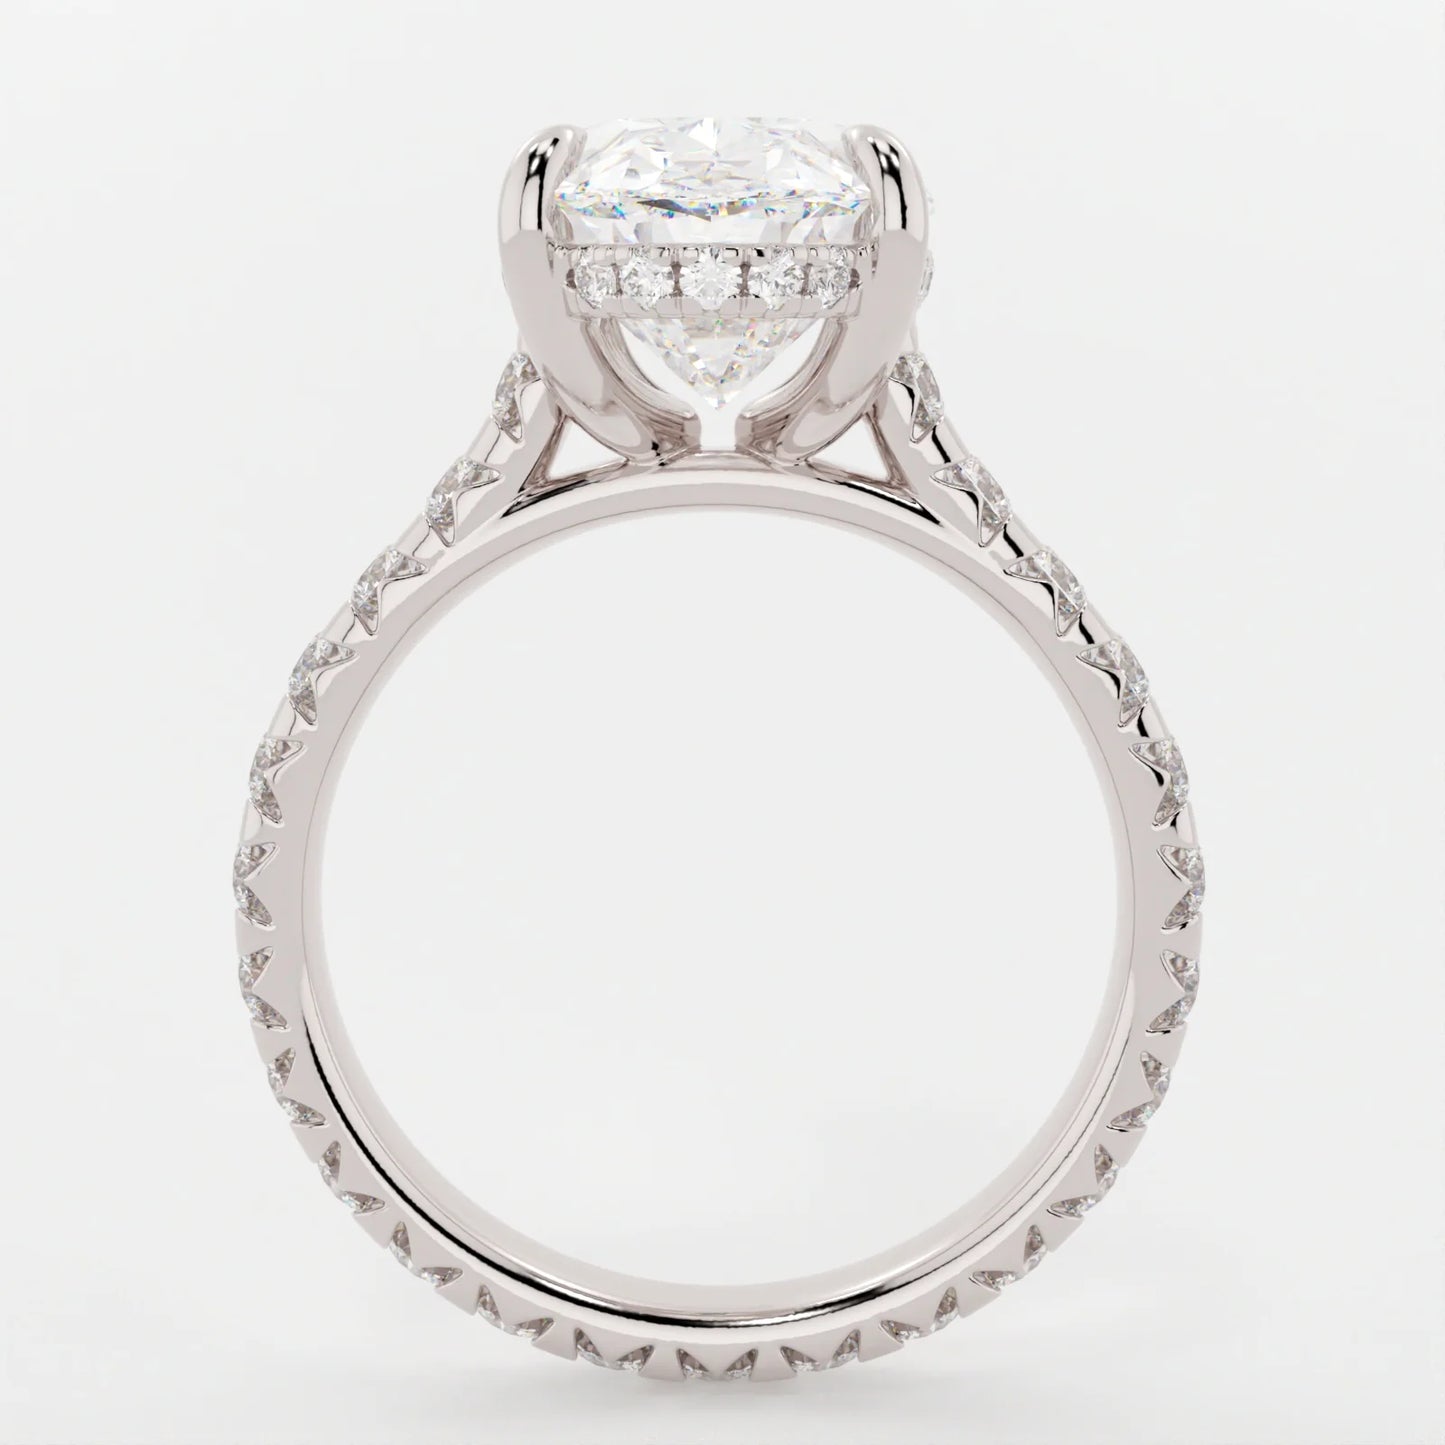 3.5 Carat Oval Cut Moissanite Diamond Engagement Ring with Pavé Band